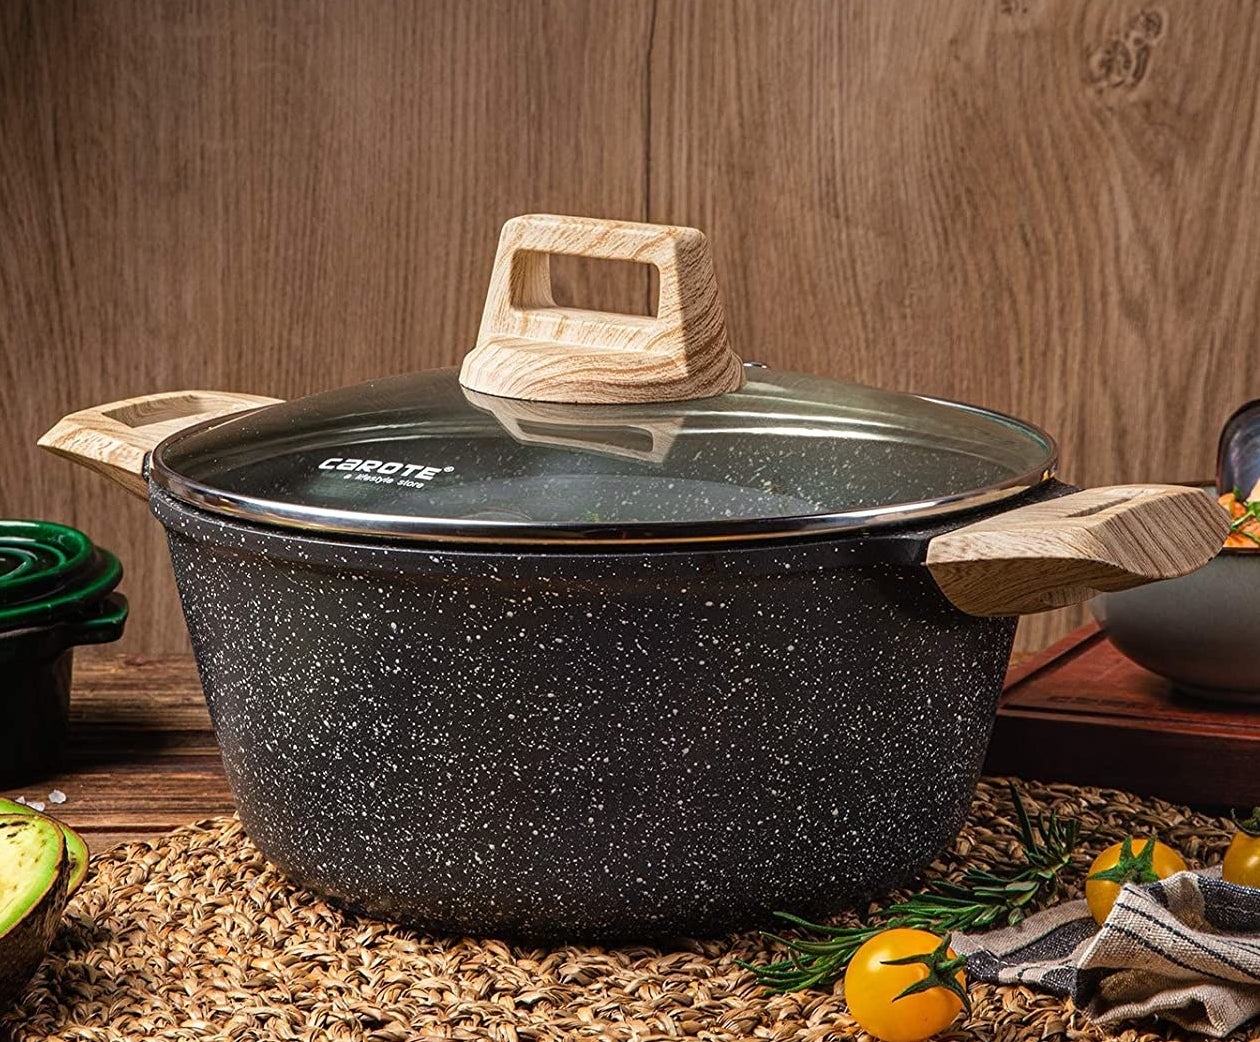 Product photo of black and white speckled dutch oven with wooden handles and a glass cover